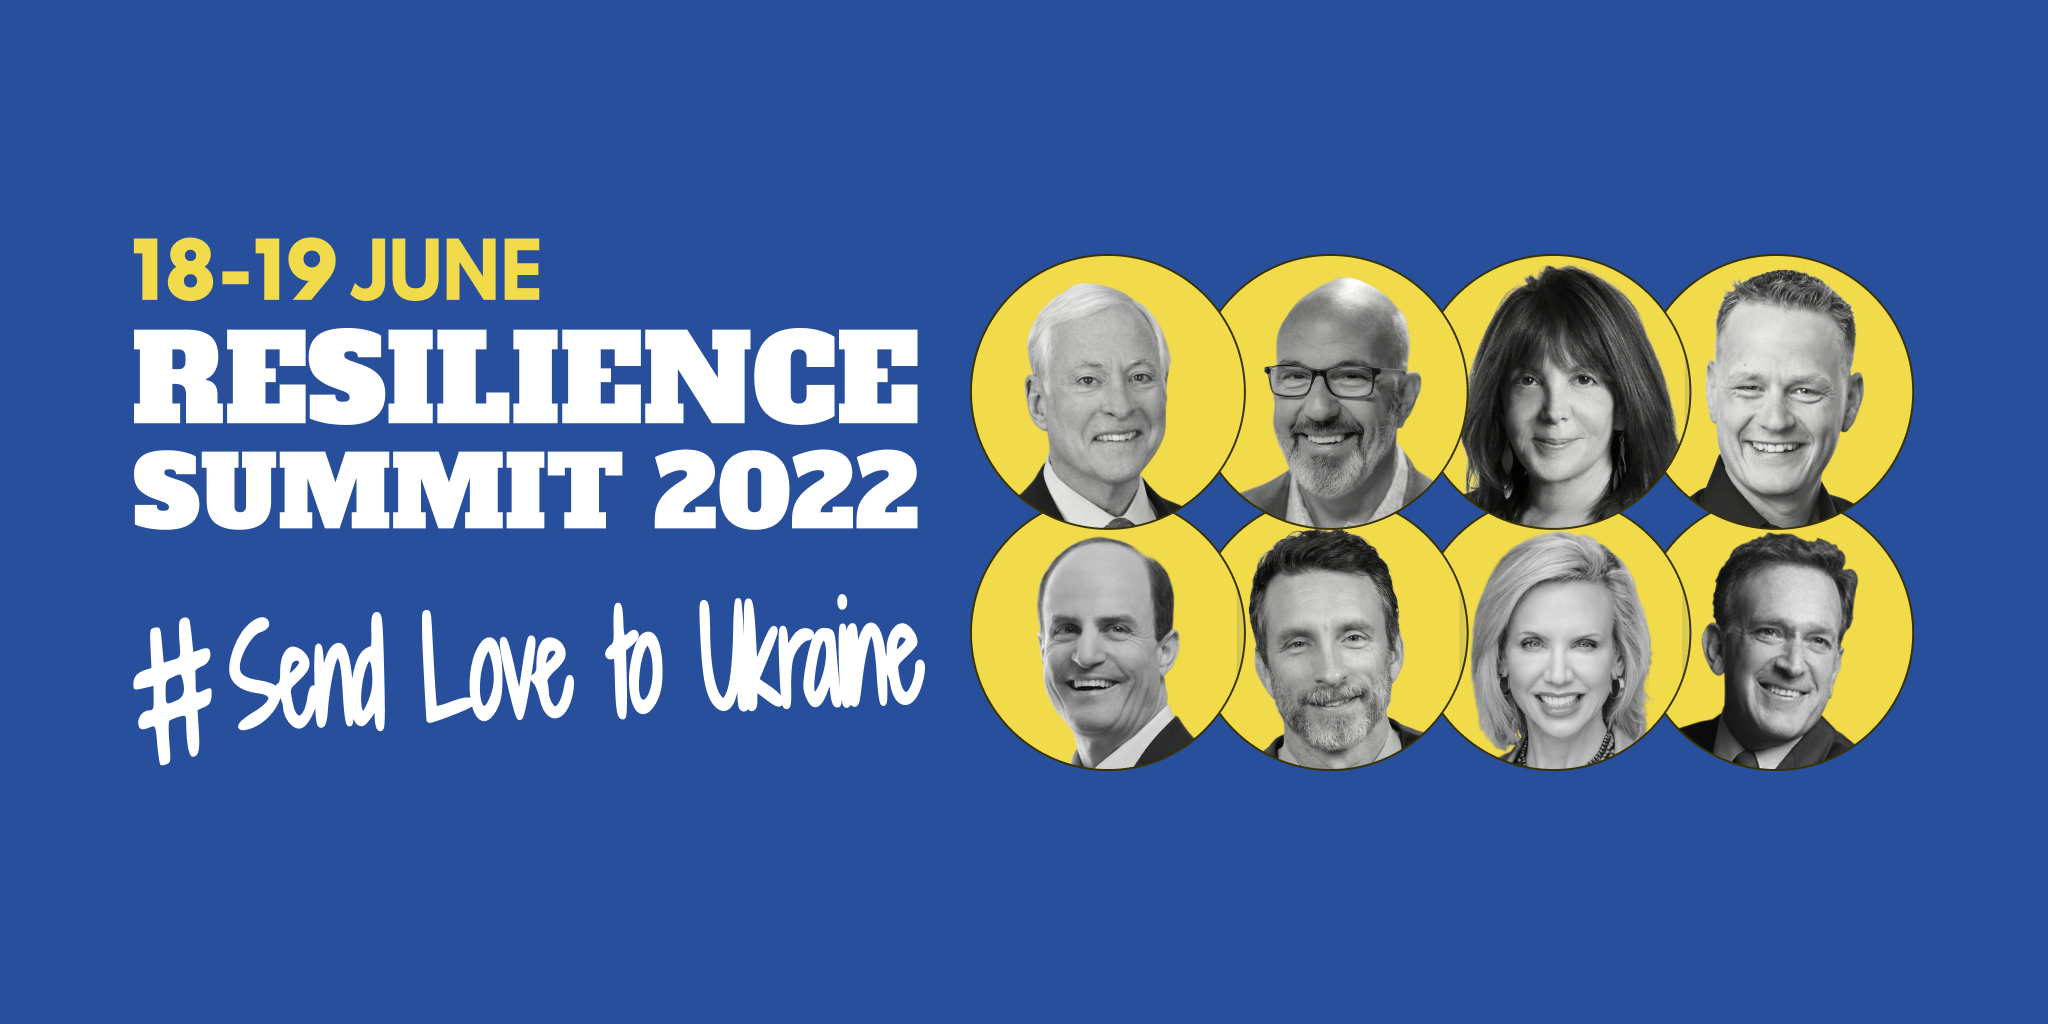 Resilience summit 2022, Online Event